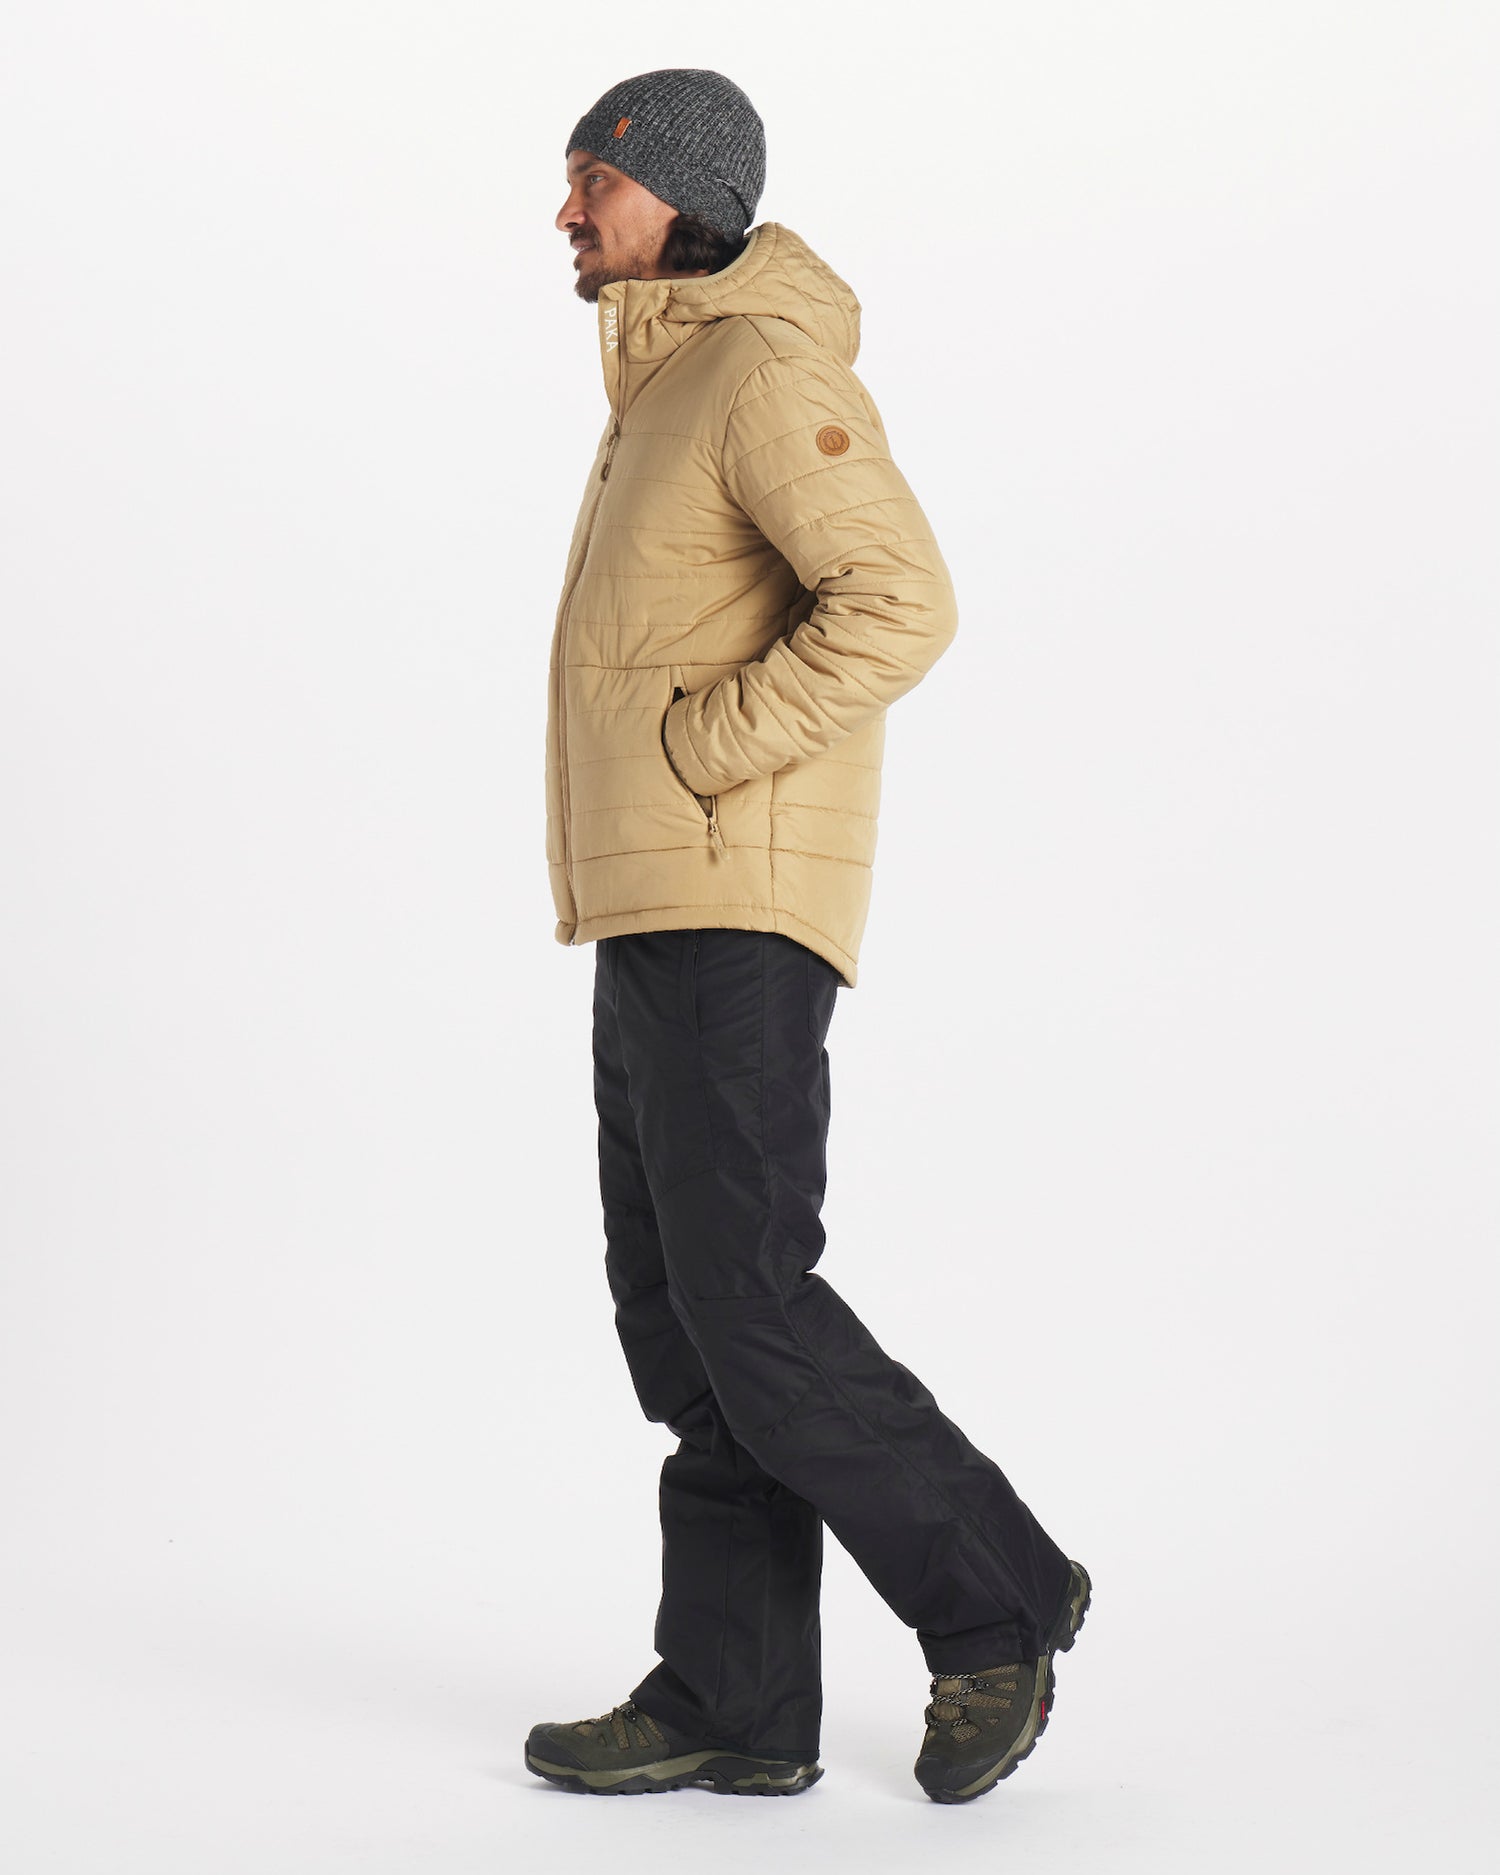 Mens tan jacket with white Paka and tag on arm